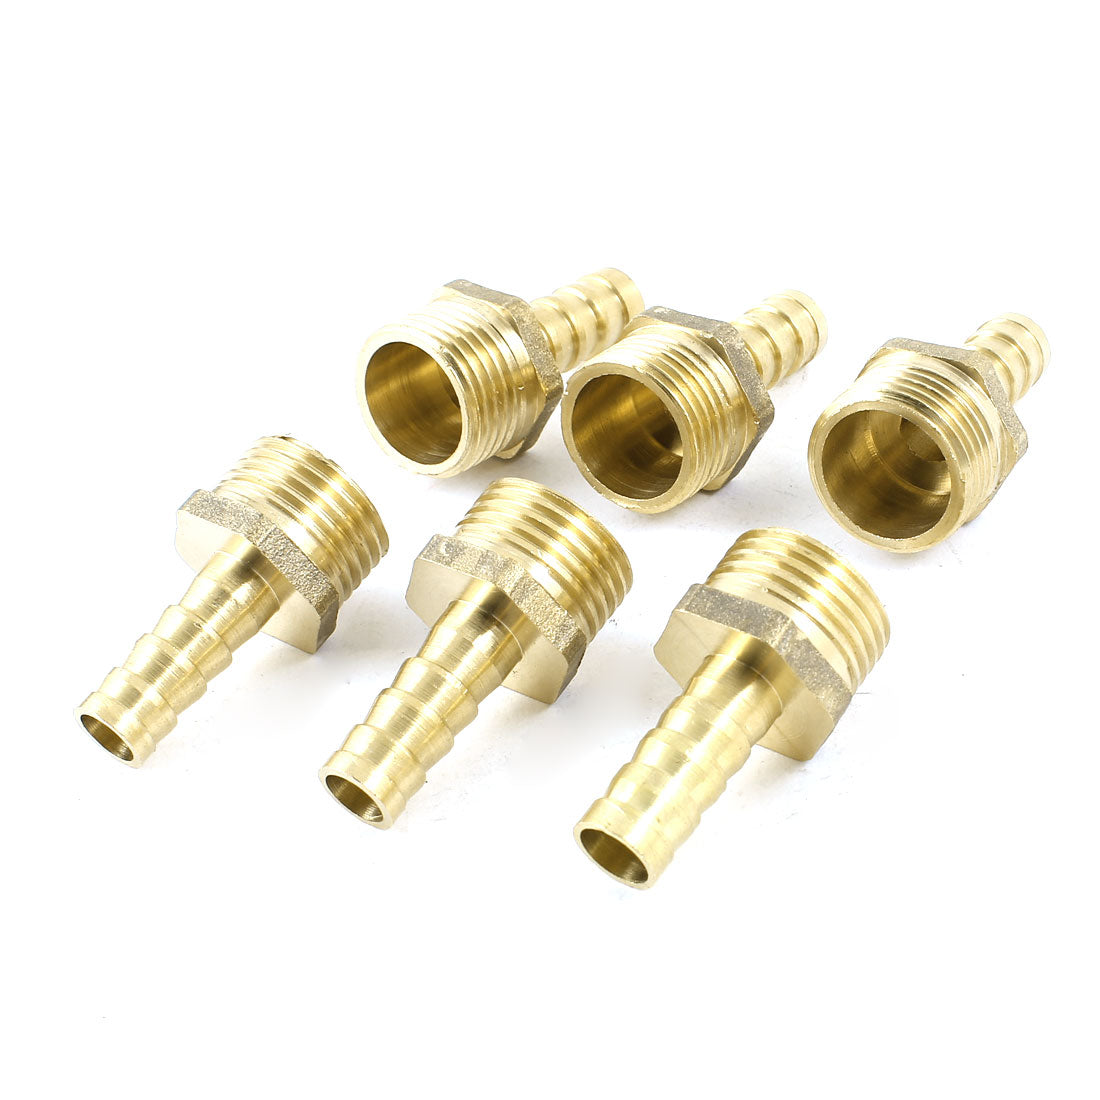 uxcell Uxcell 6pcs Brass 10mm Hose Barb to 1/2 PT Male Threaded Air Water Gas Quick Coupling Connector Fitting Adapter